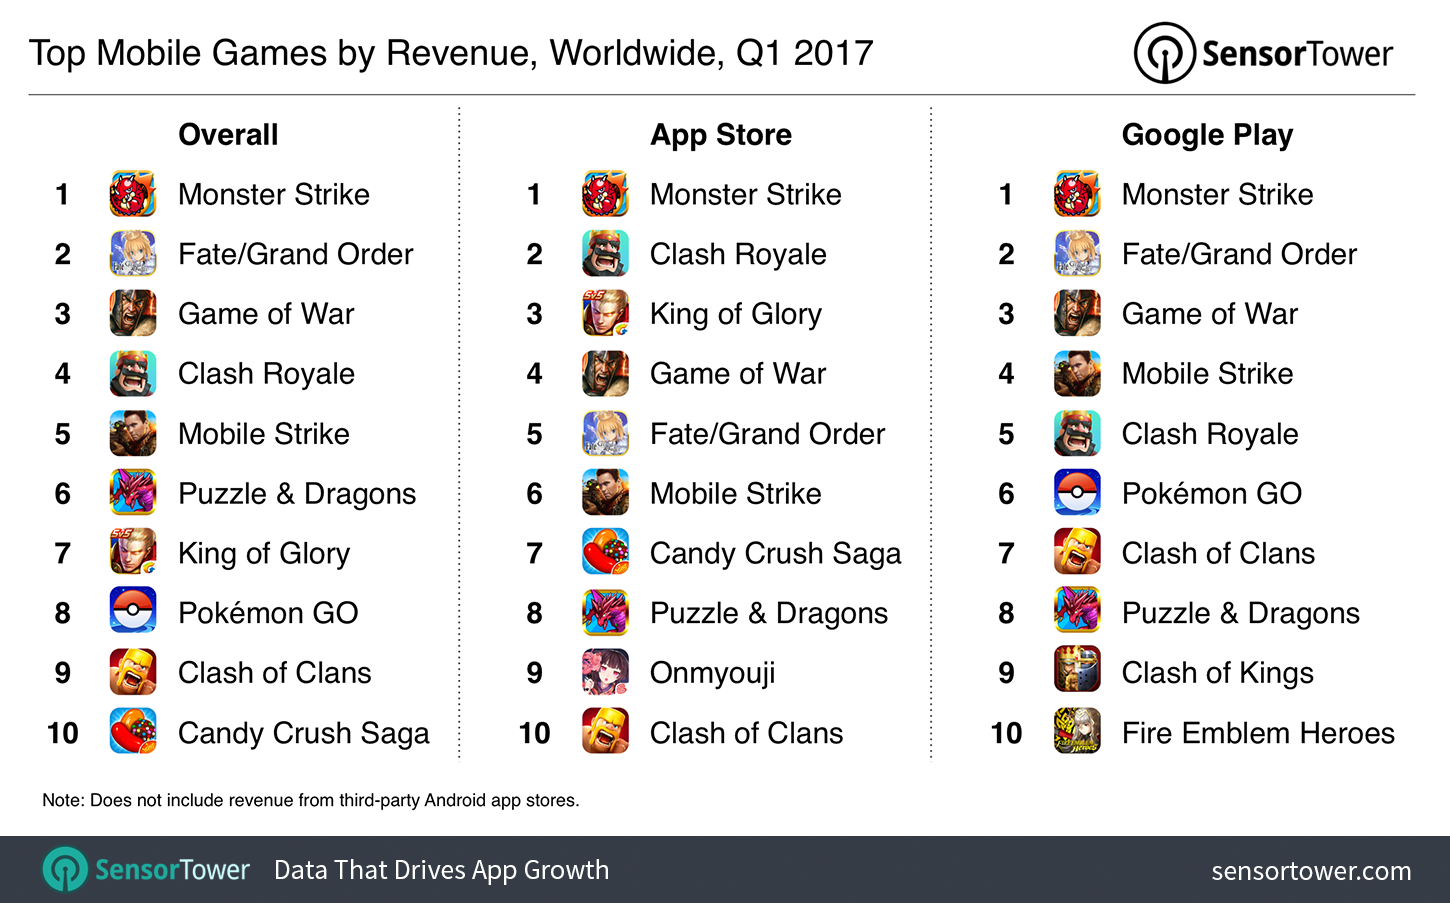 Q1 2017's Top Mobile Games by Revenue